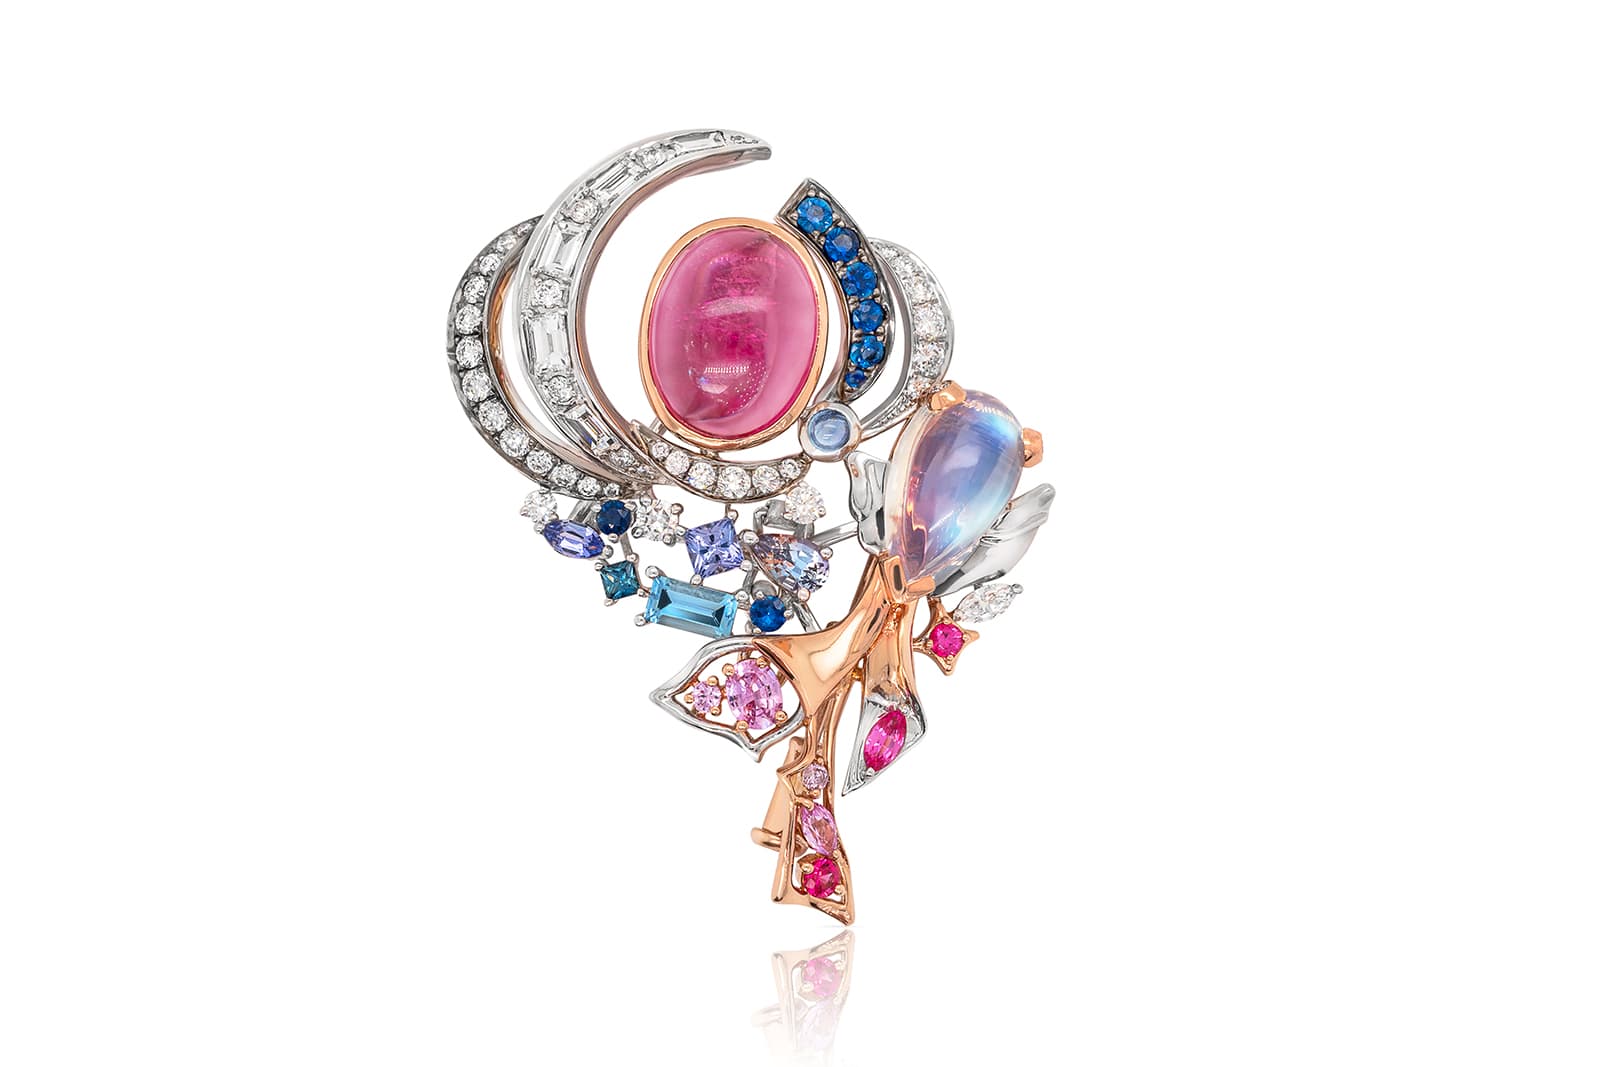 One of Madly’s most recent bespoke creations: an extraordinary brooch set with tourmalines, moonstones, diamonds, sapphires and spinels that can be worn in 11 different ways